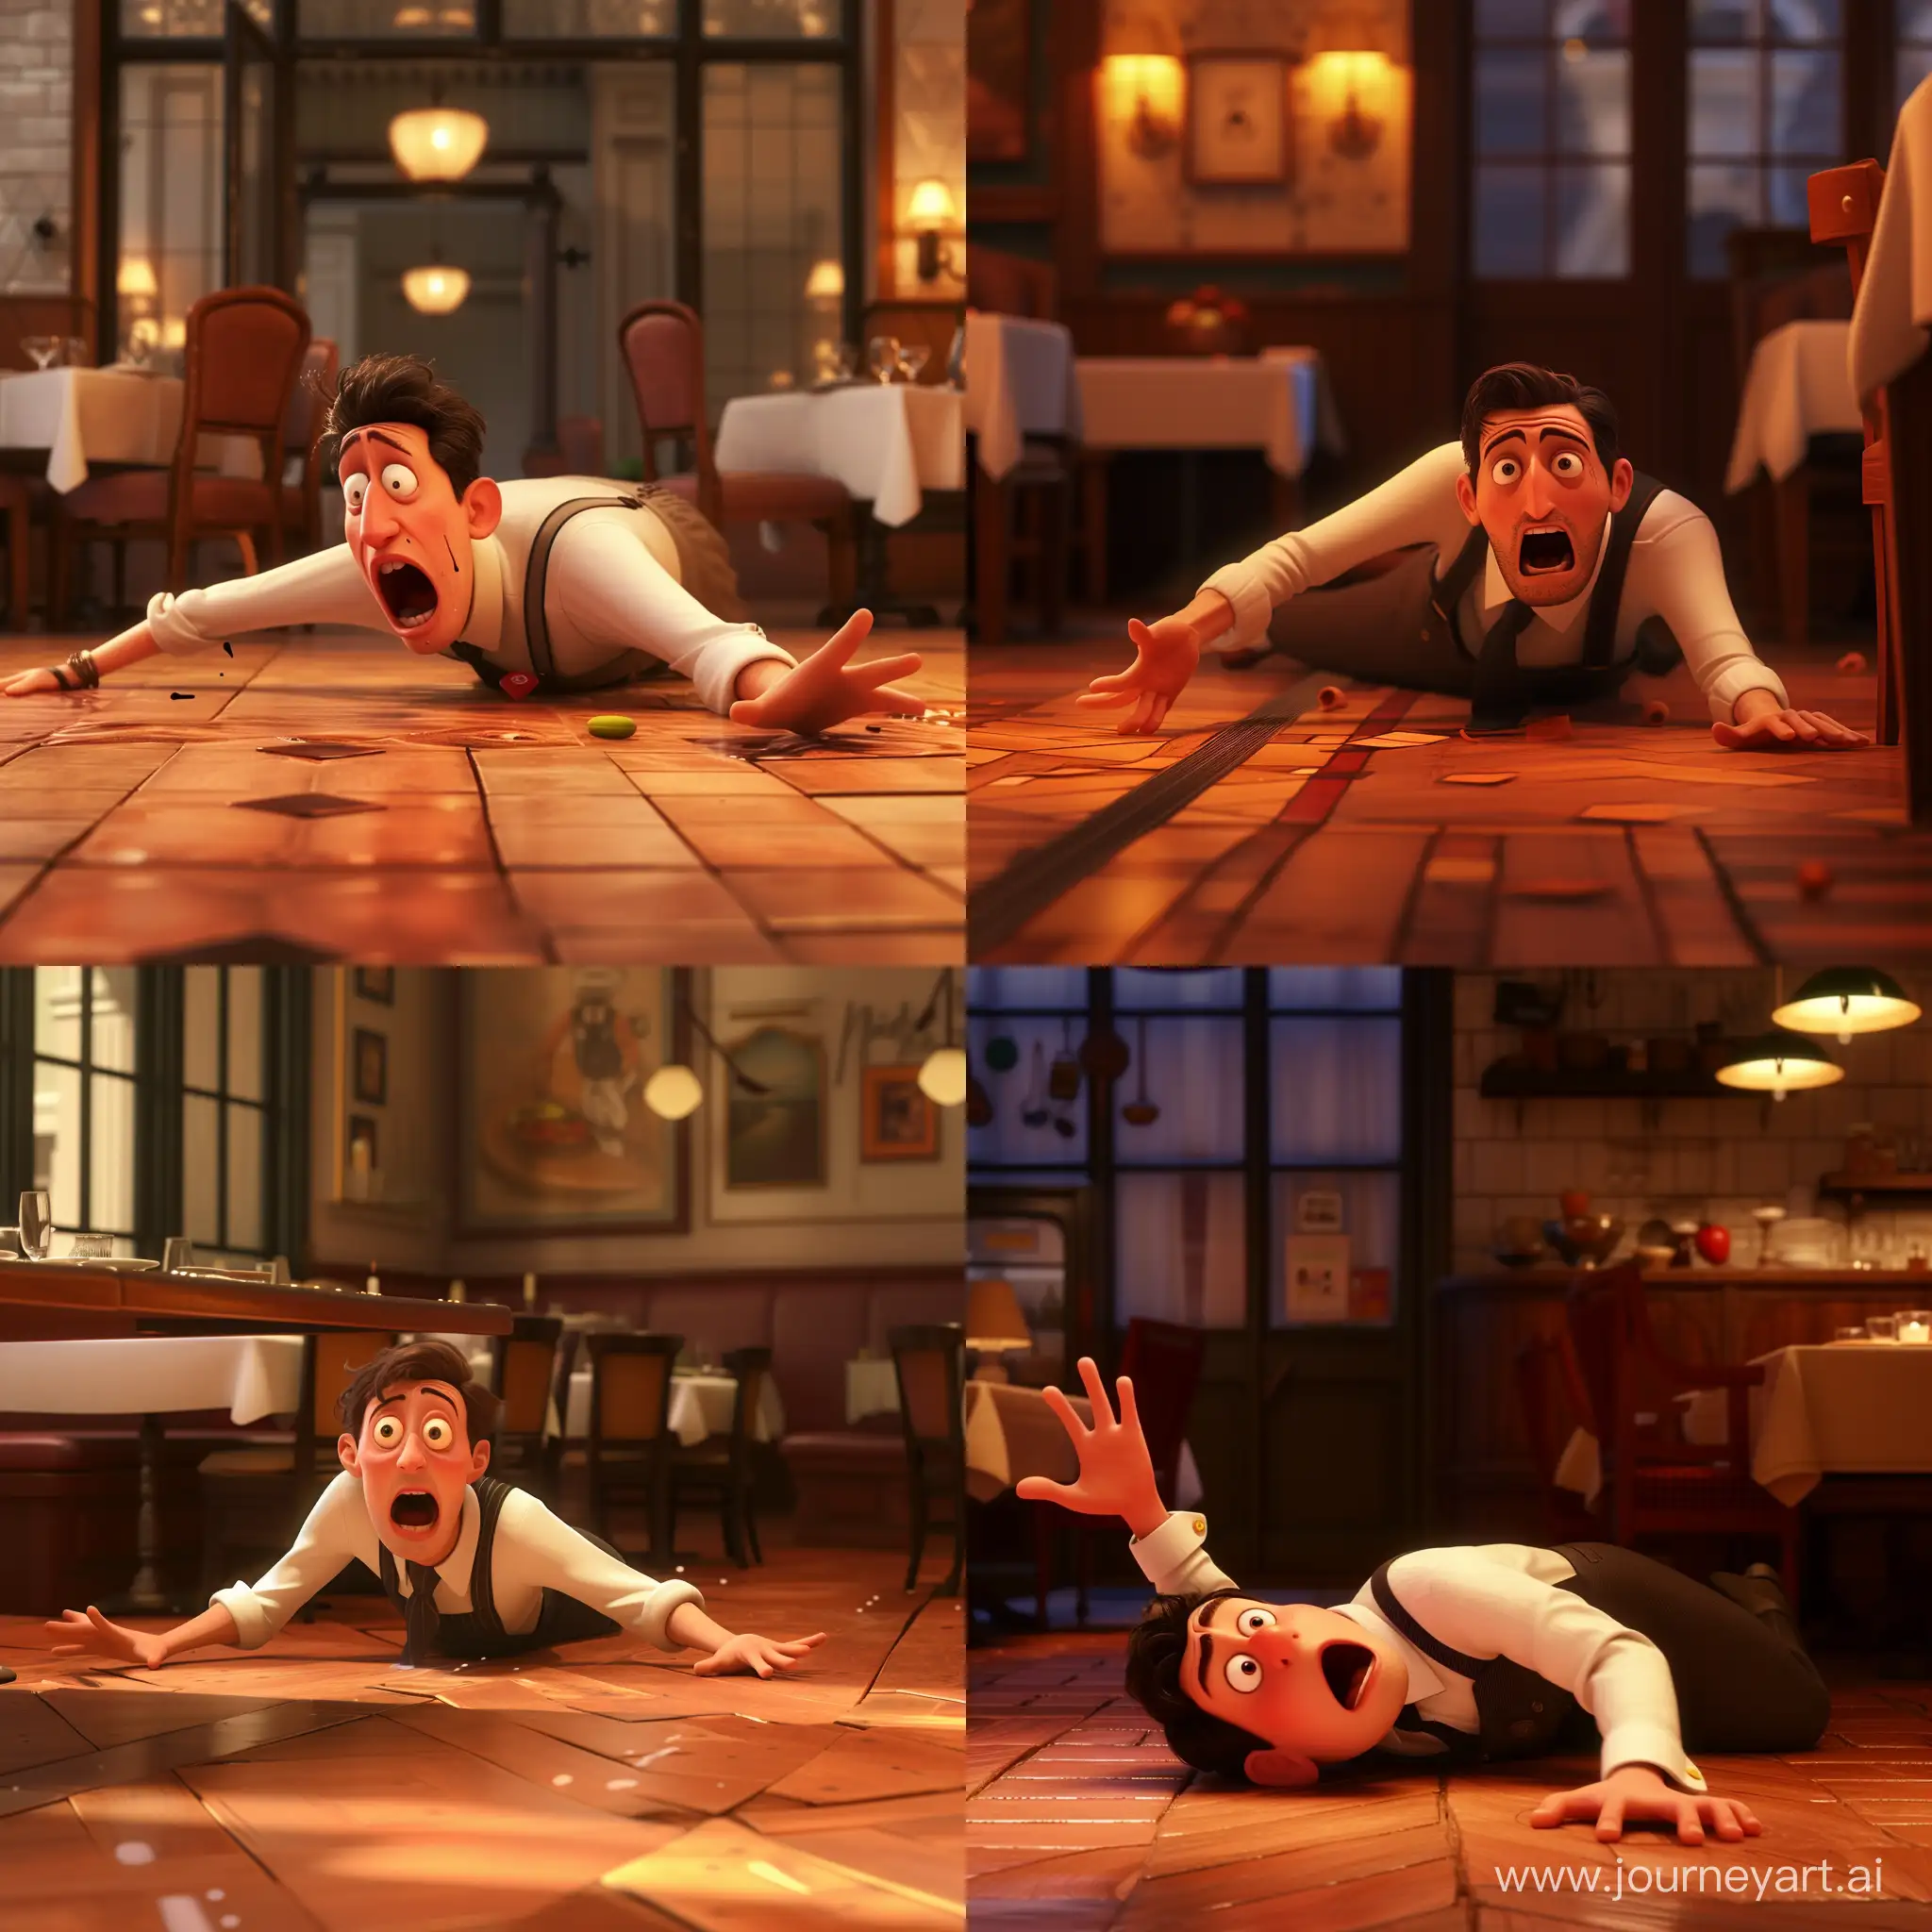 Exhausted-Waiter-Reaches-for-Relief-in-PixarStyle-Scene